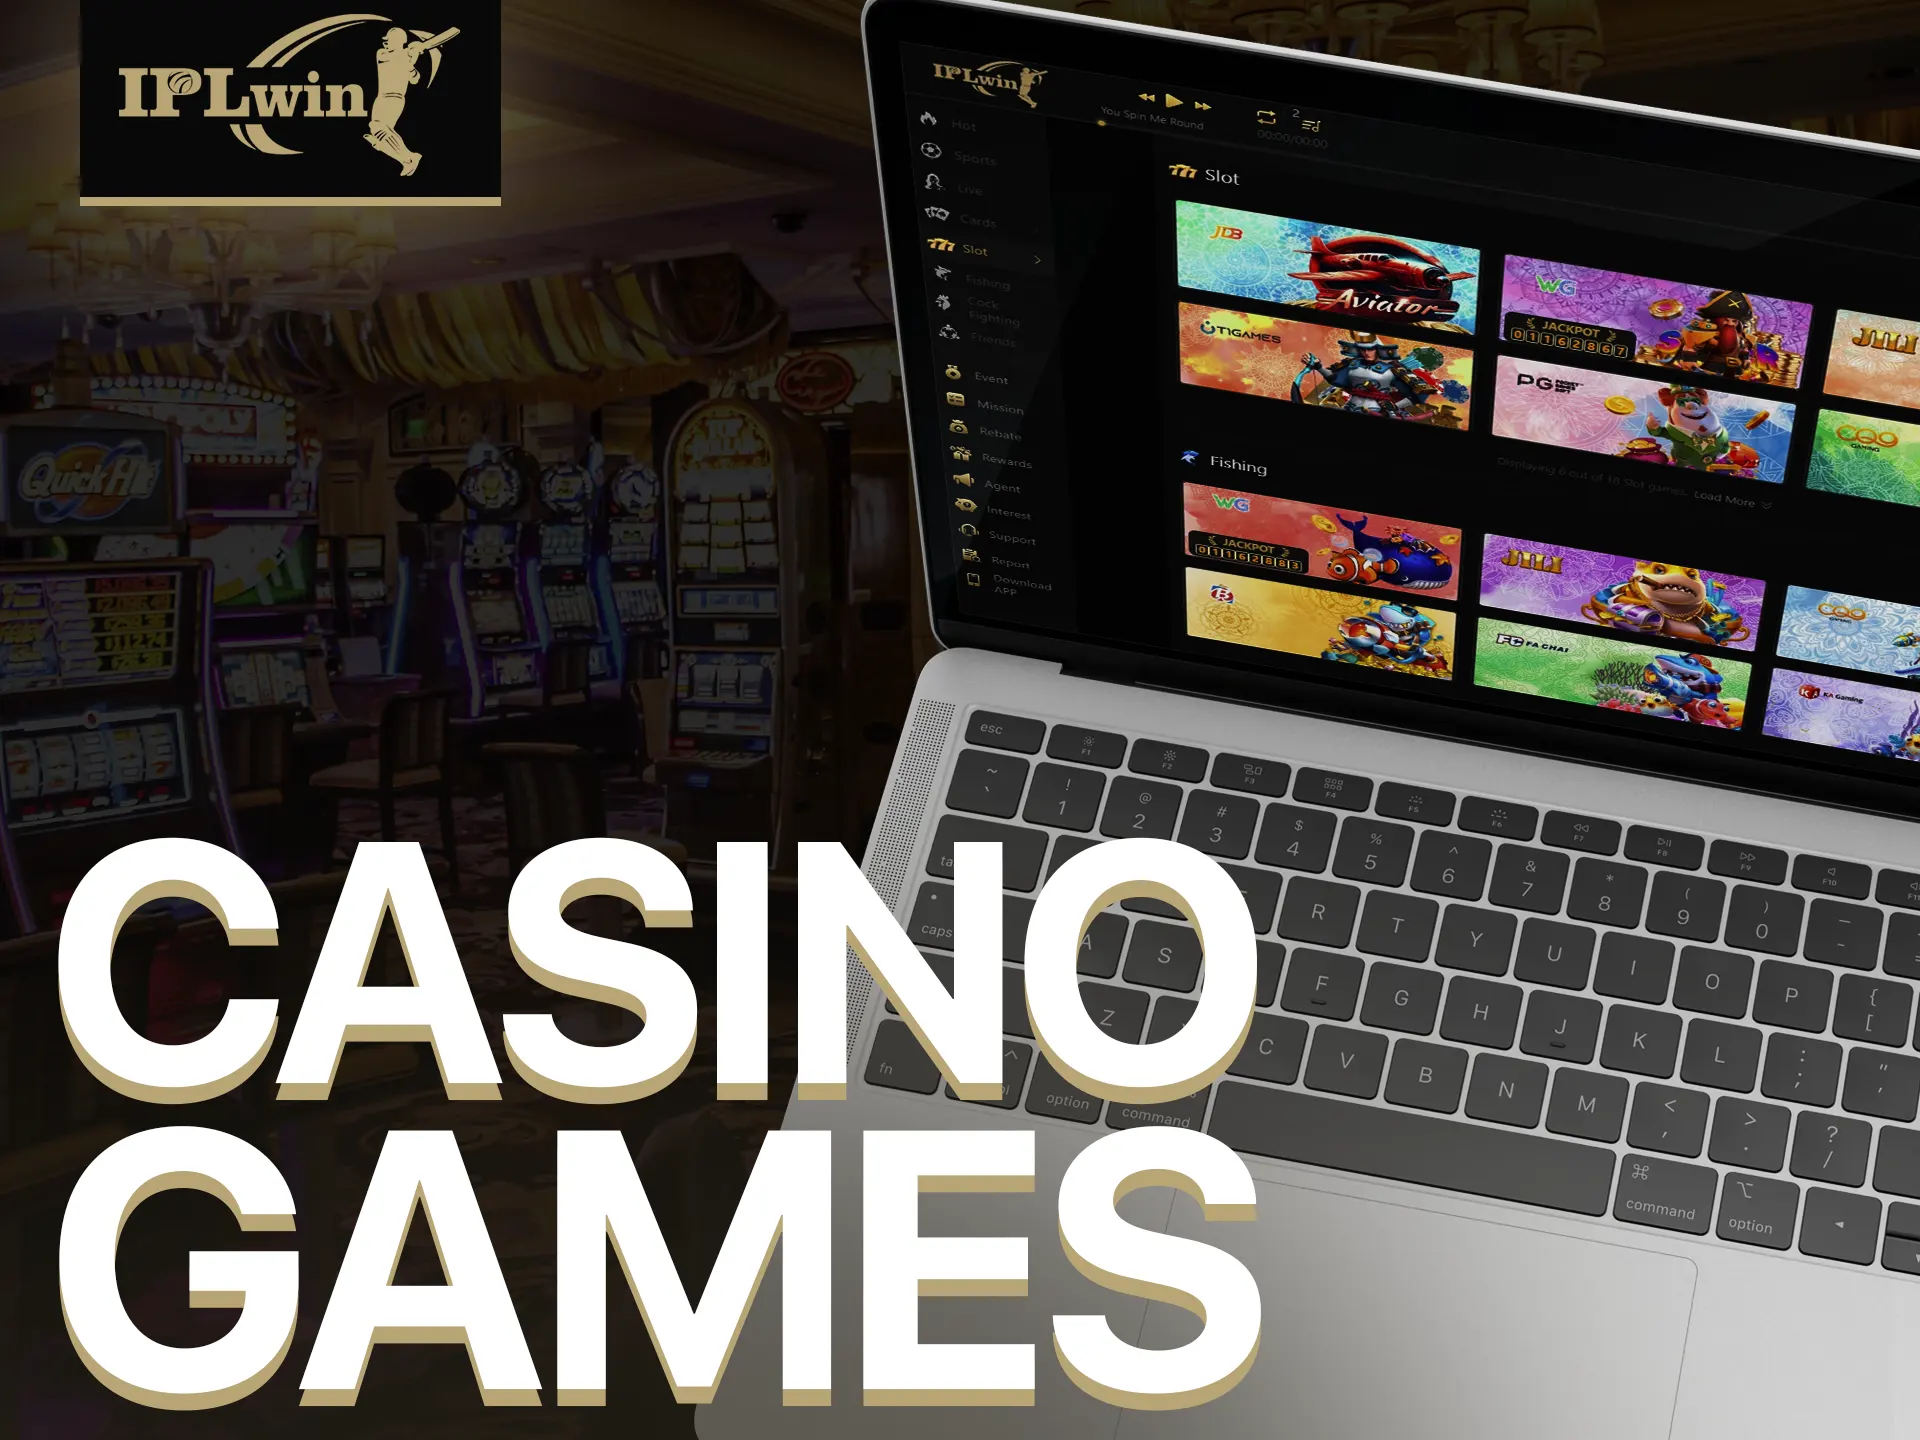 IPLWIN provides a wide range of casino games.